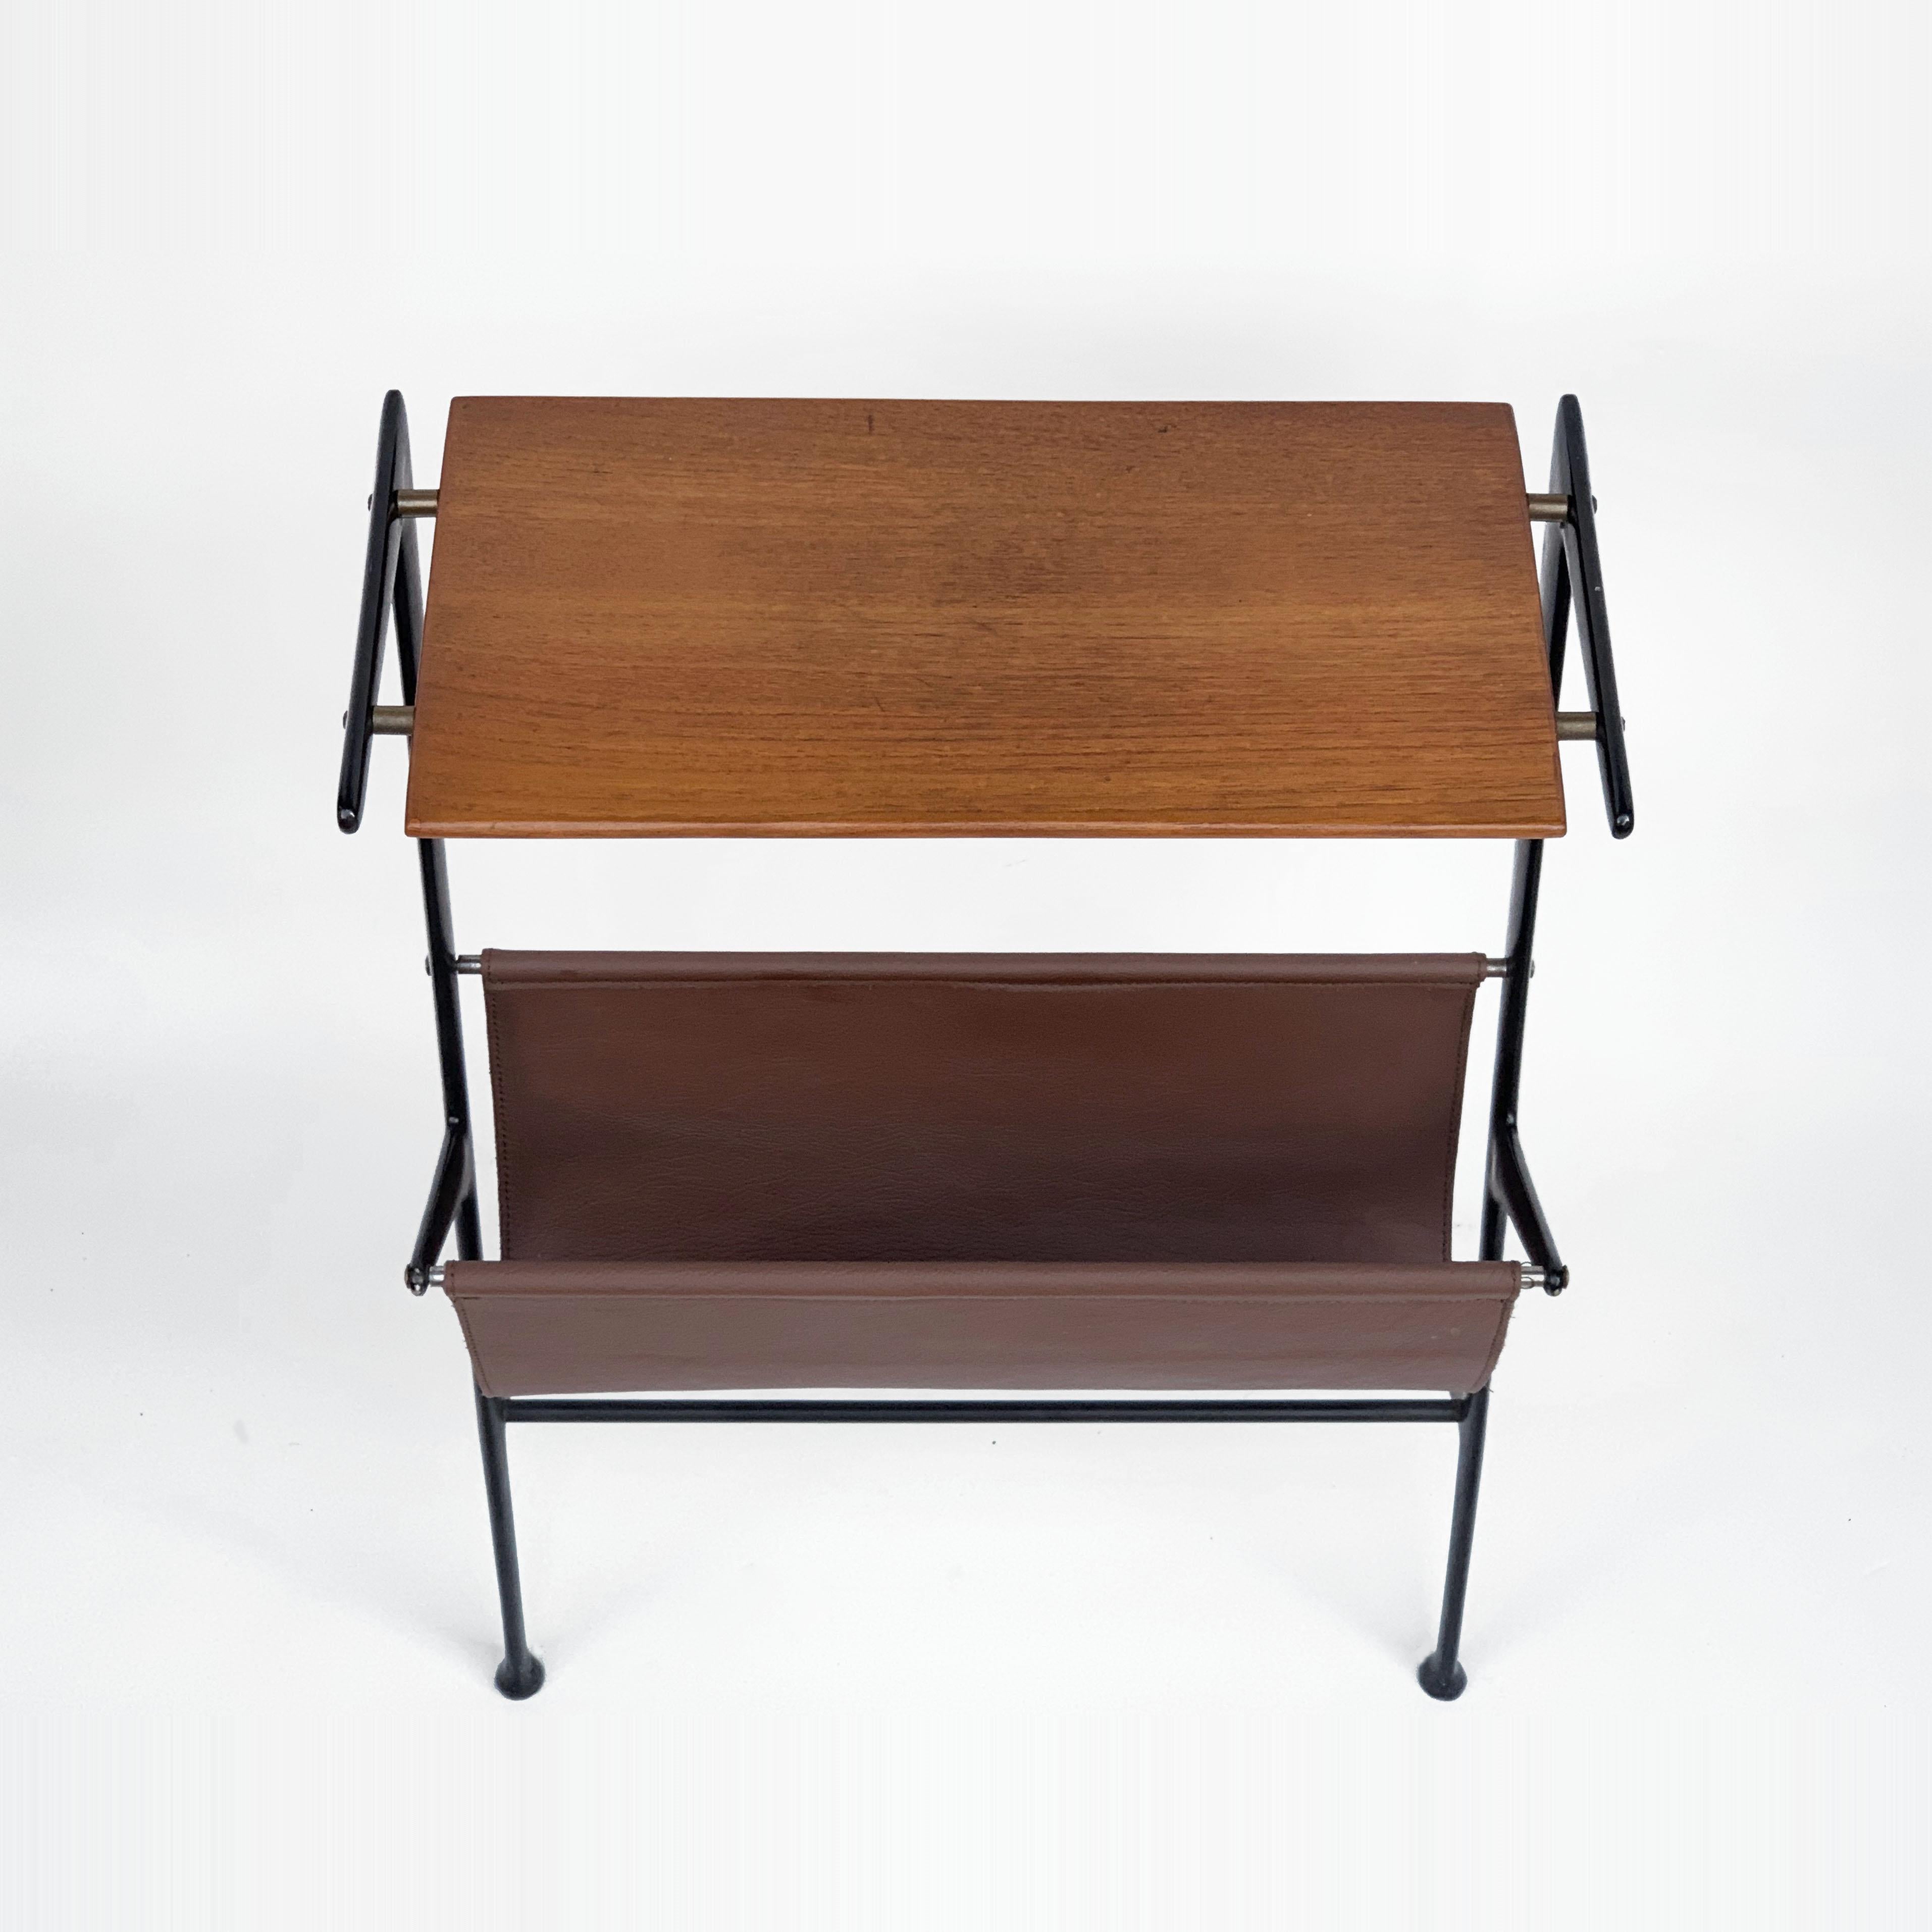 Magazine Table, Metal, Wood and Leather, Italy, 1950s Ico Parisi 5